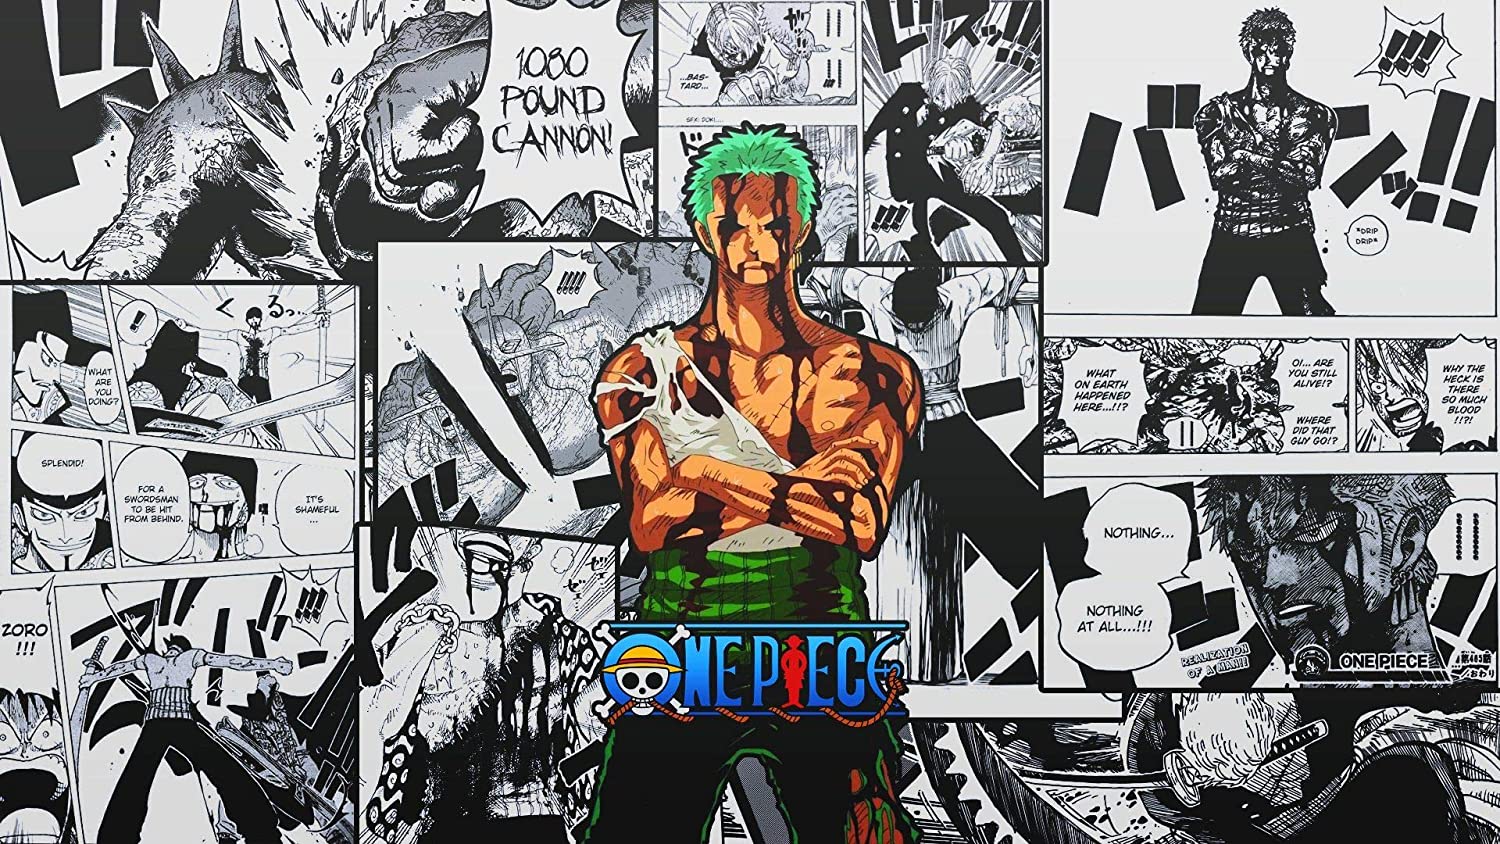 Anime One Piece Roronoa Zoro Manga Poster and Prints Unframed Wall Art Gifts Decor 12x18: Posters & Prints